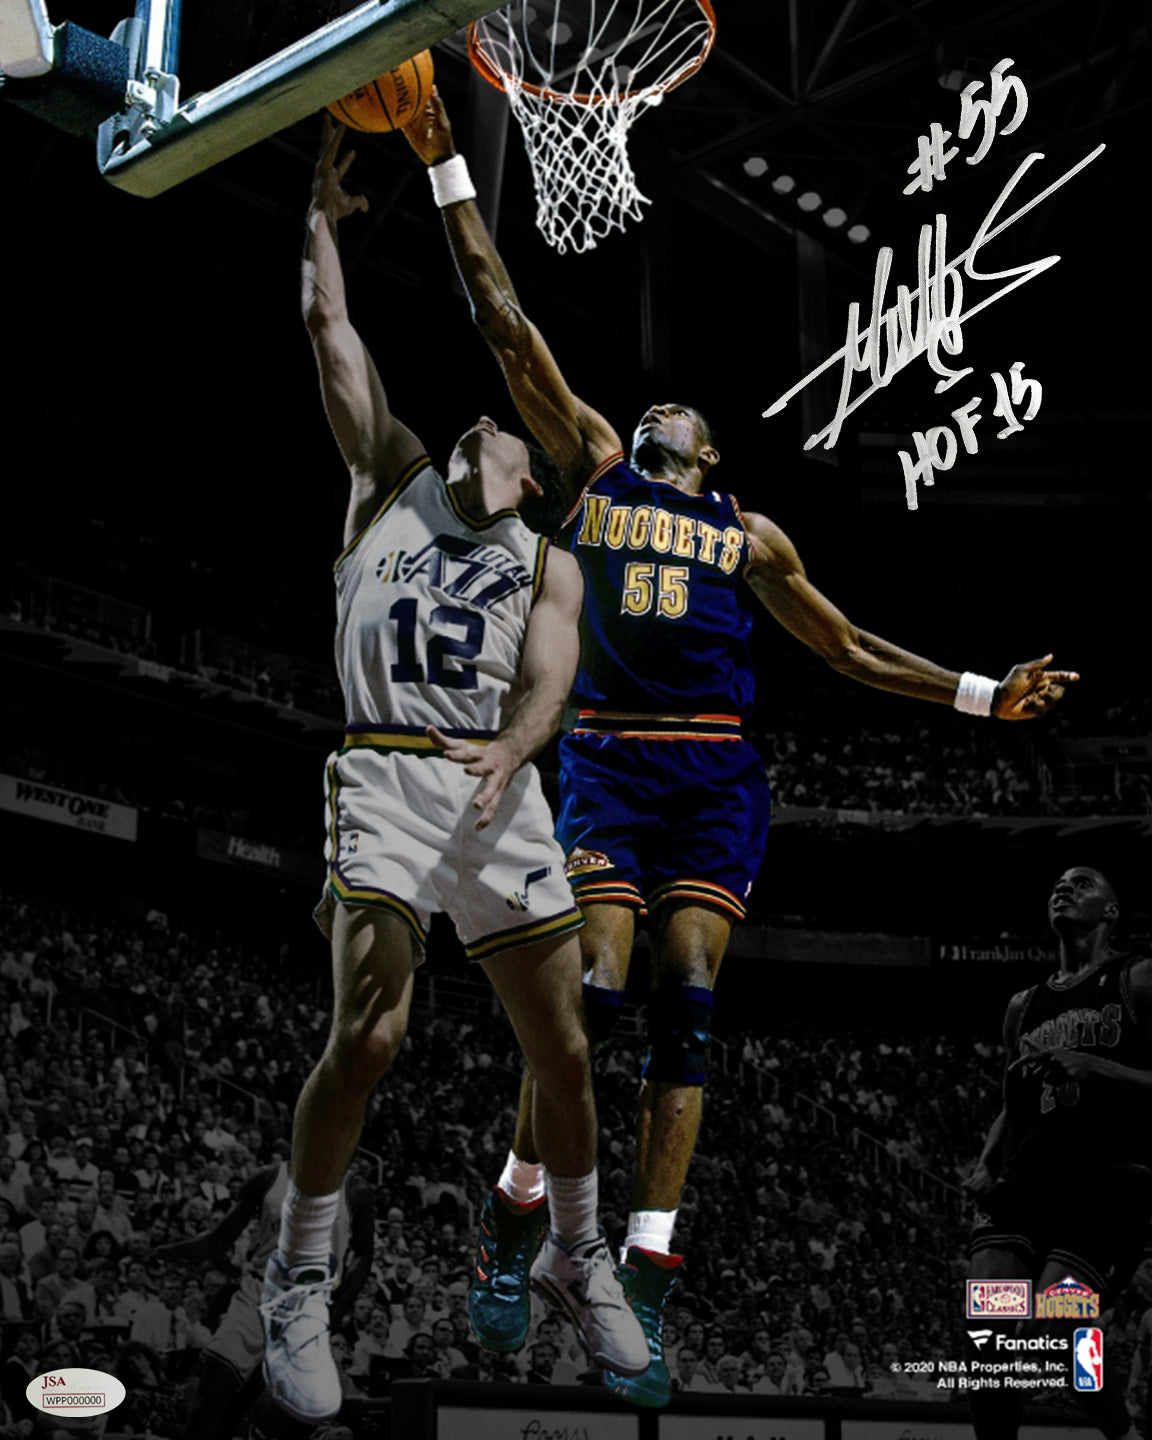 CARMELO ANTHONY SIGNED AUTOGRAPH 11x14 PHOTO - DENVER NUGGETS BASKETBALL  STAR!